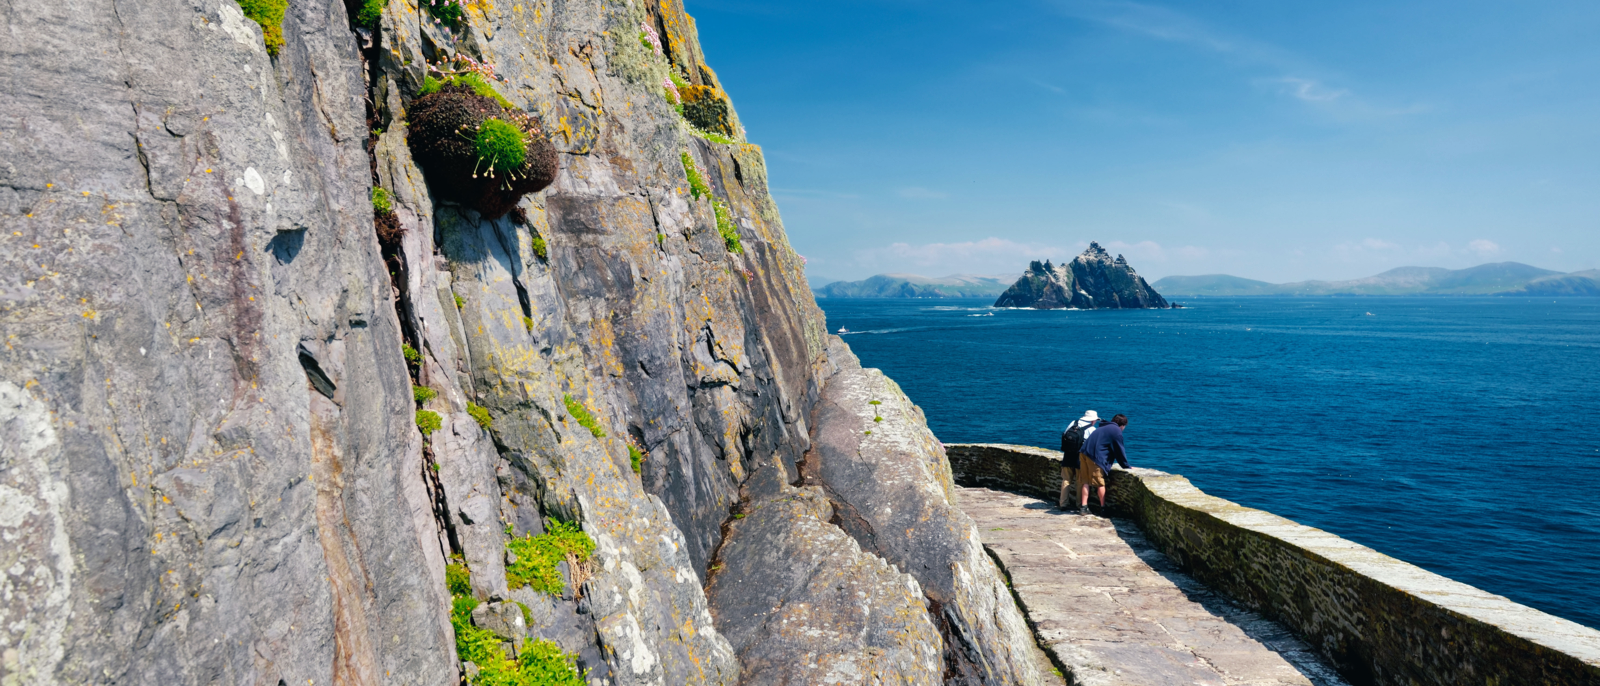 Skellig Michael or Great Skellig, home to the ruined remains of a Christian monastery. Inhabited by variety of seabirds, including gannets and puffins. UNESCO World Heritage Site, Ireland.